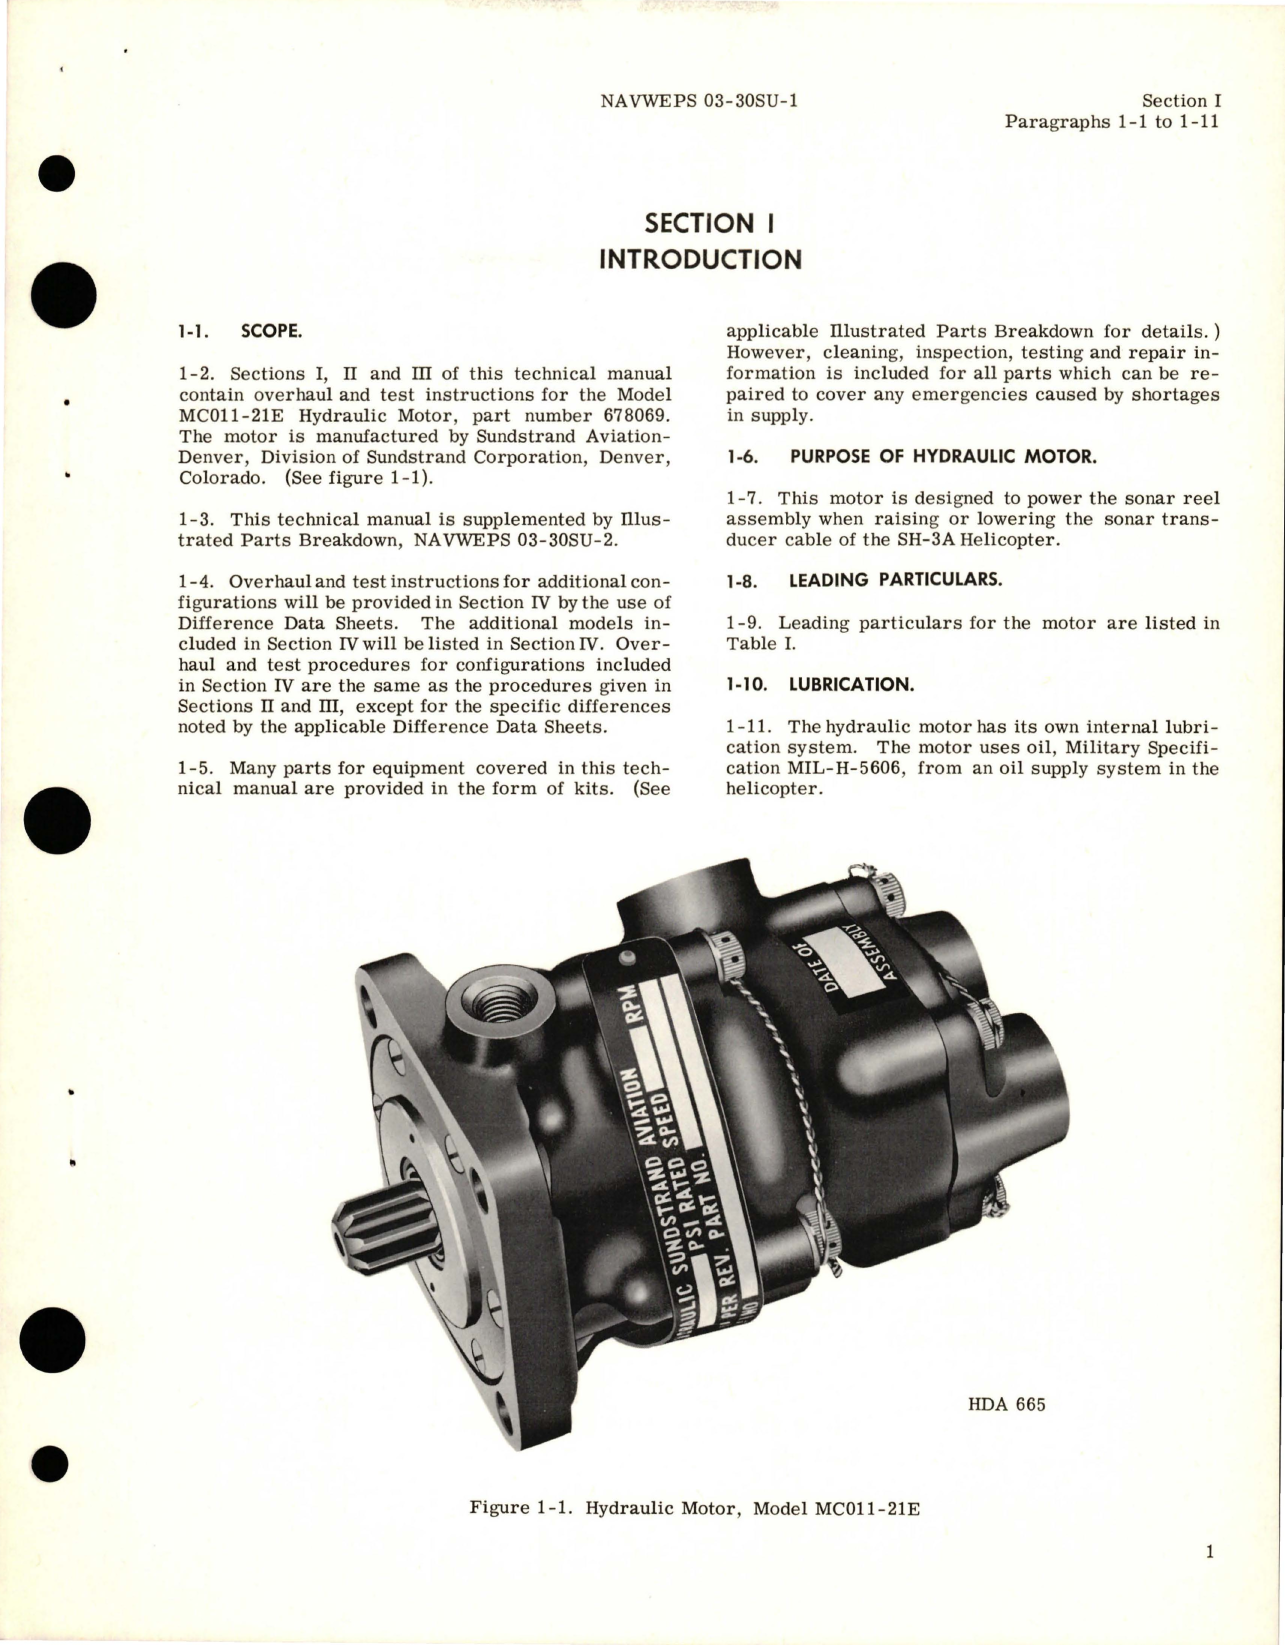 Sample page 5 from AirCorps Library document: Overhaul Instructions for Hydraulic Motor - Model MC011-21E - Part 678069